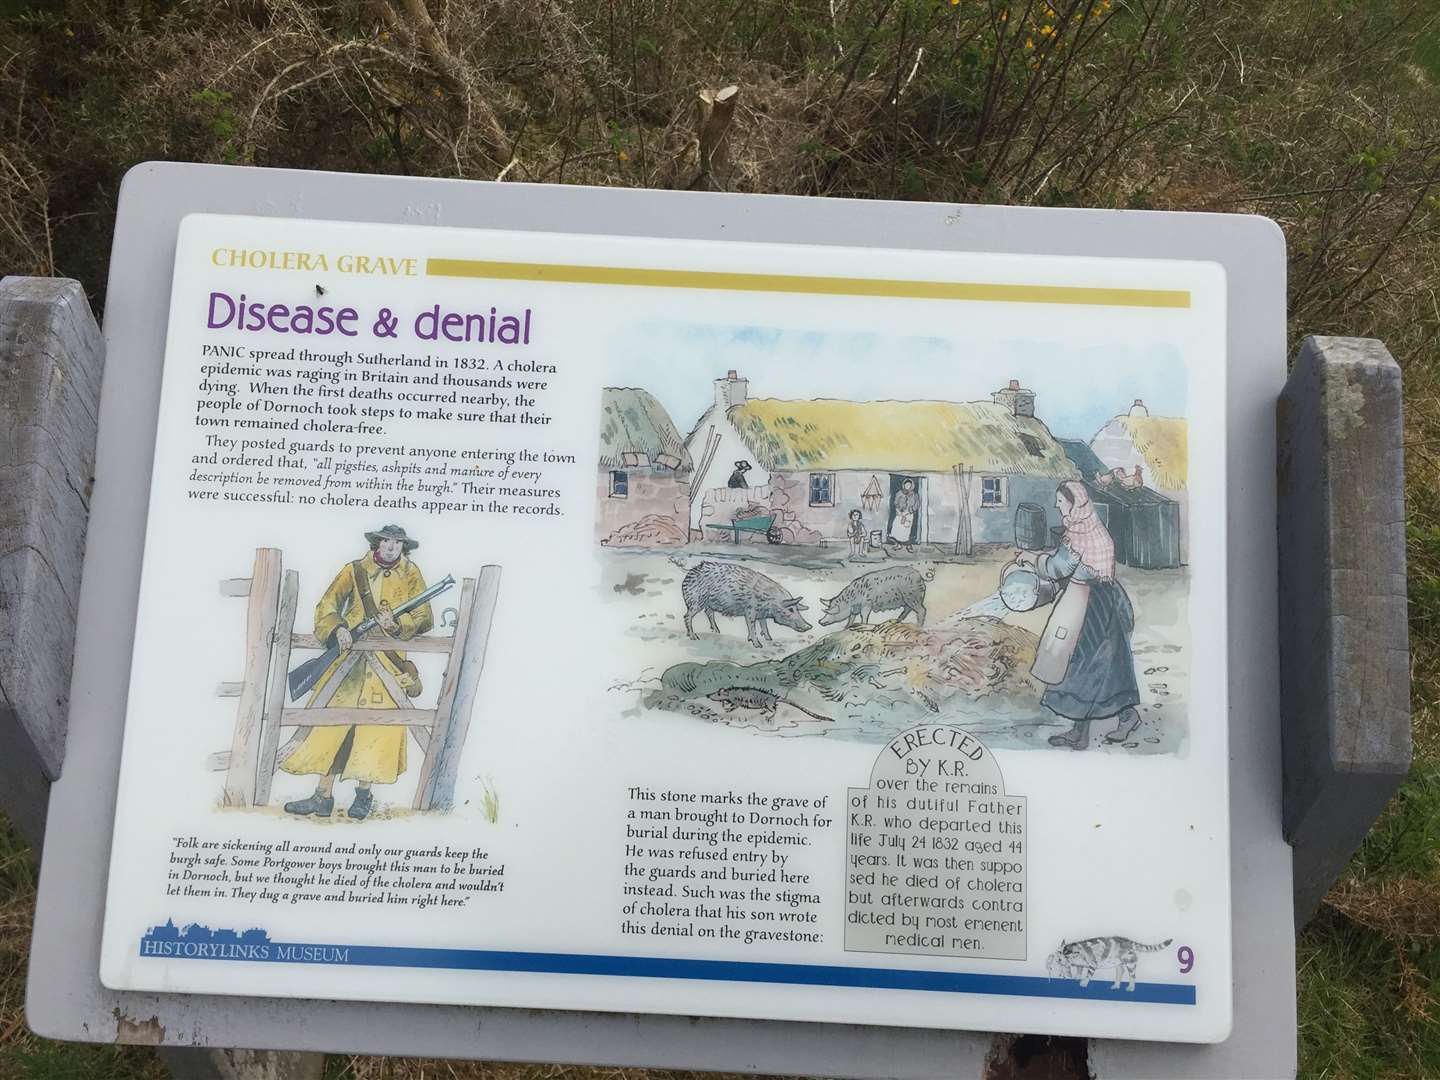 The plaque recording how guards were posted to prevent anyone entering Dornoch.